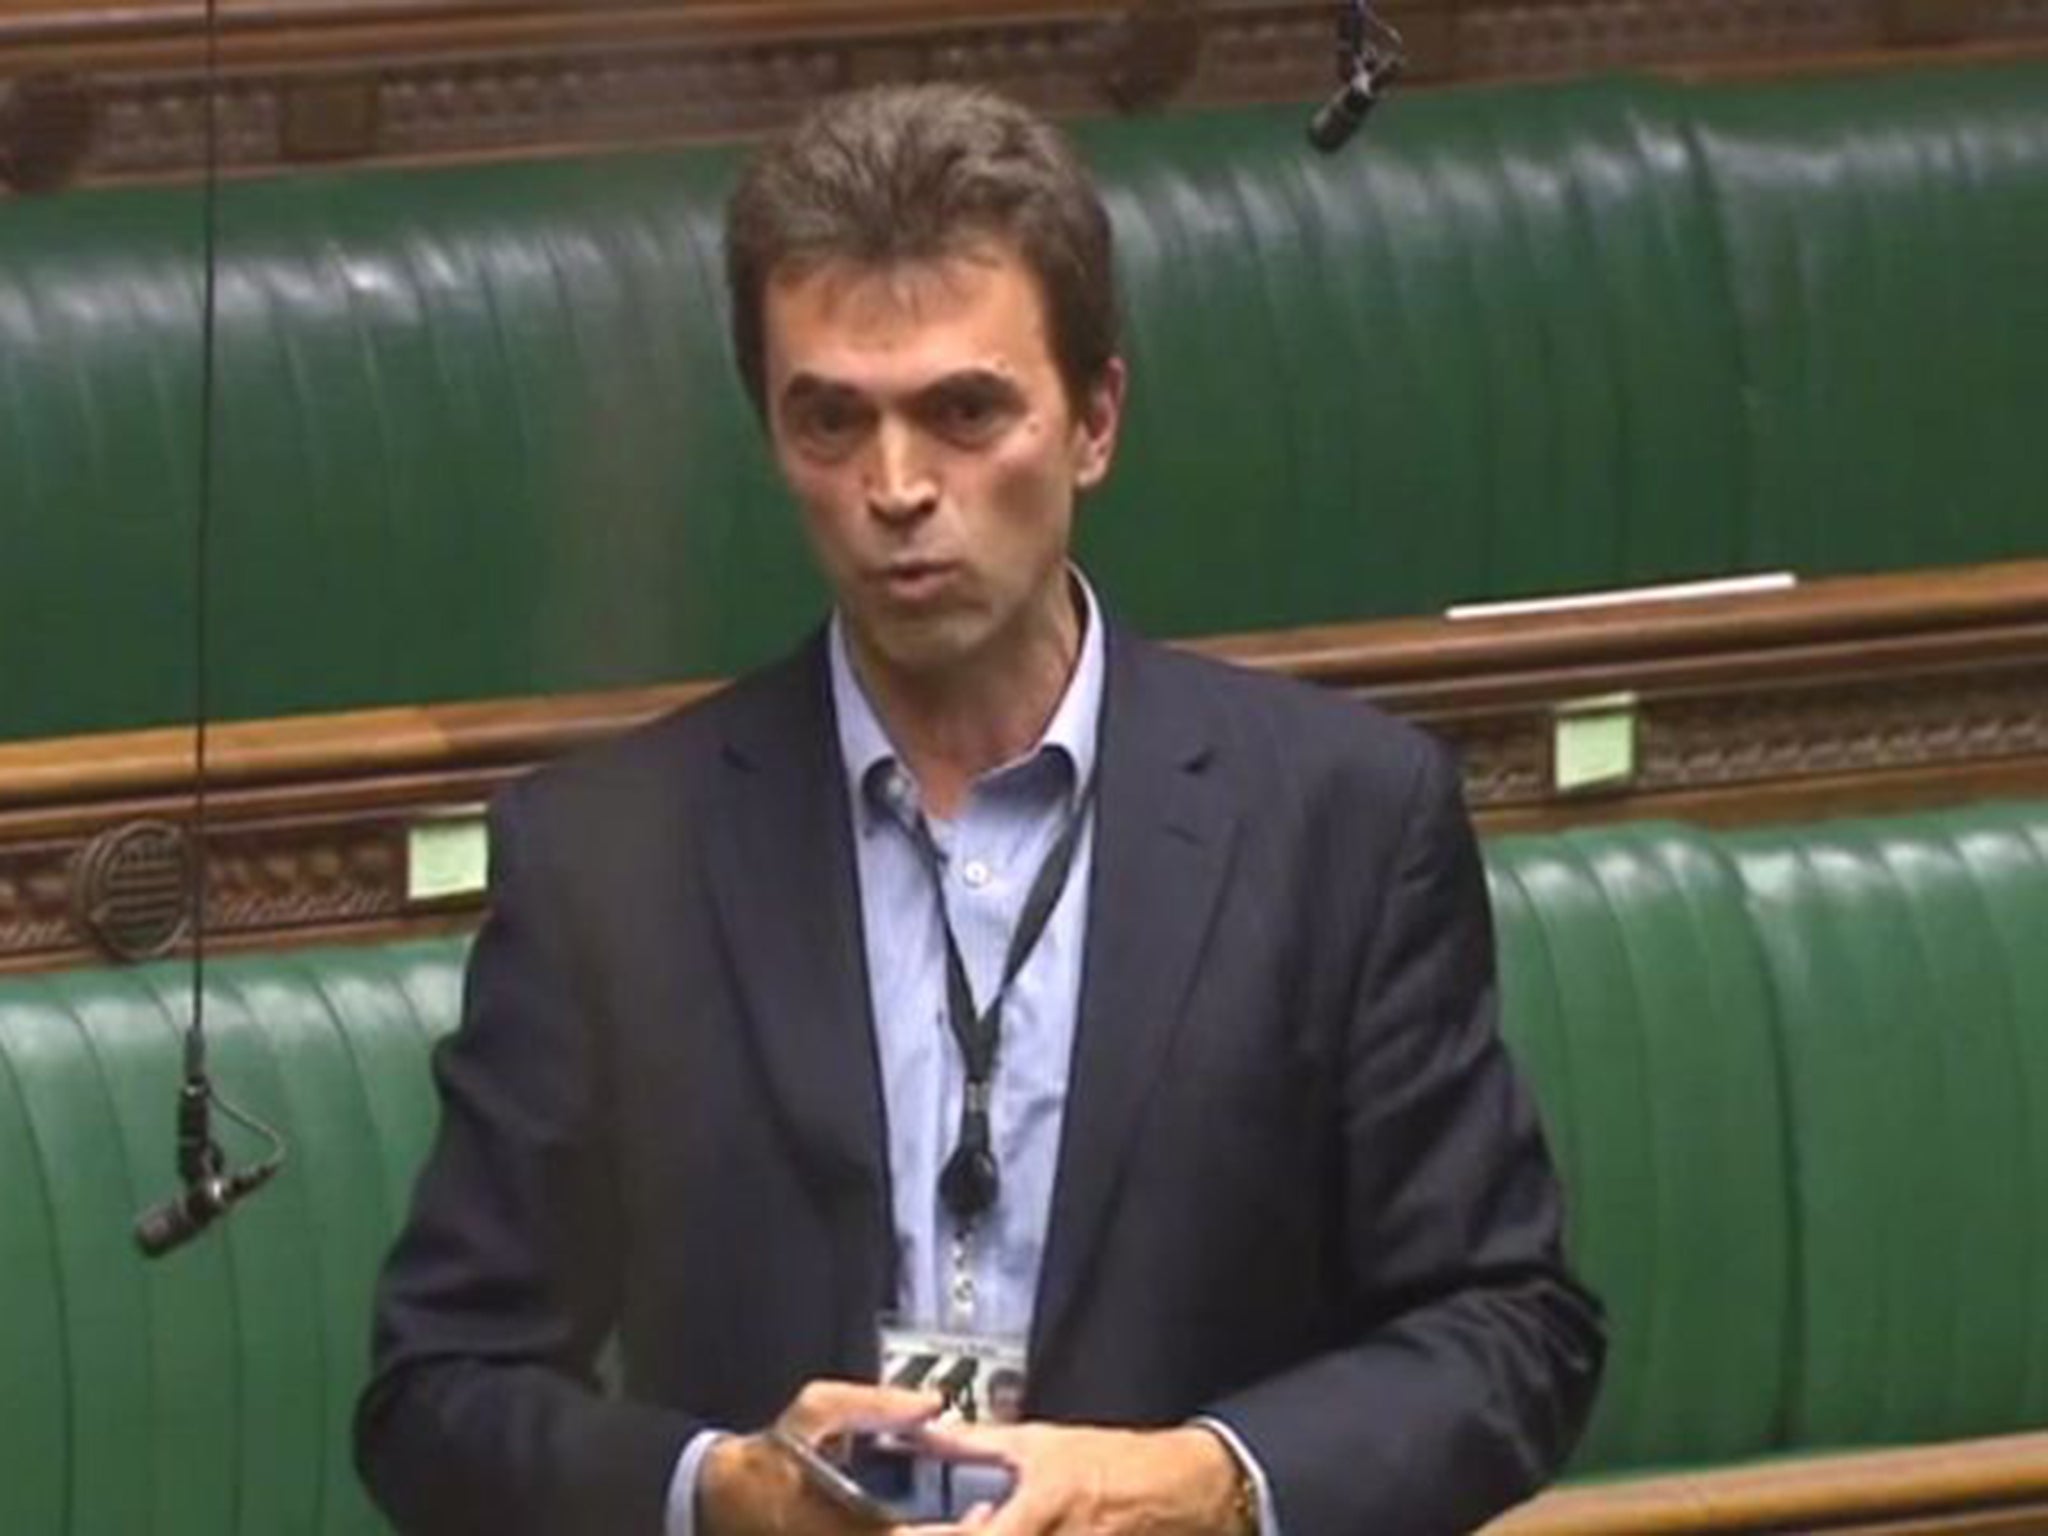 Liberal Democrat MP Tom Brake in the House of Commons on Wednesday ... clearly not wearing a tie